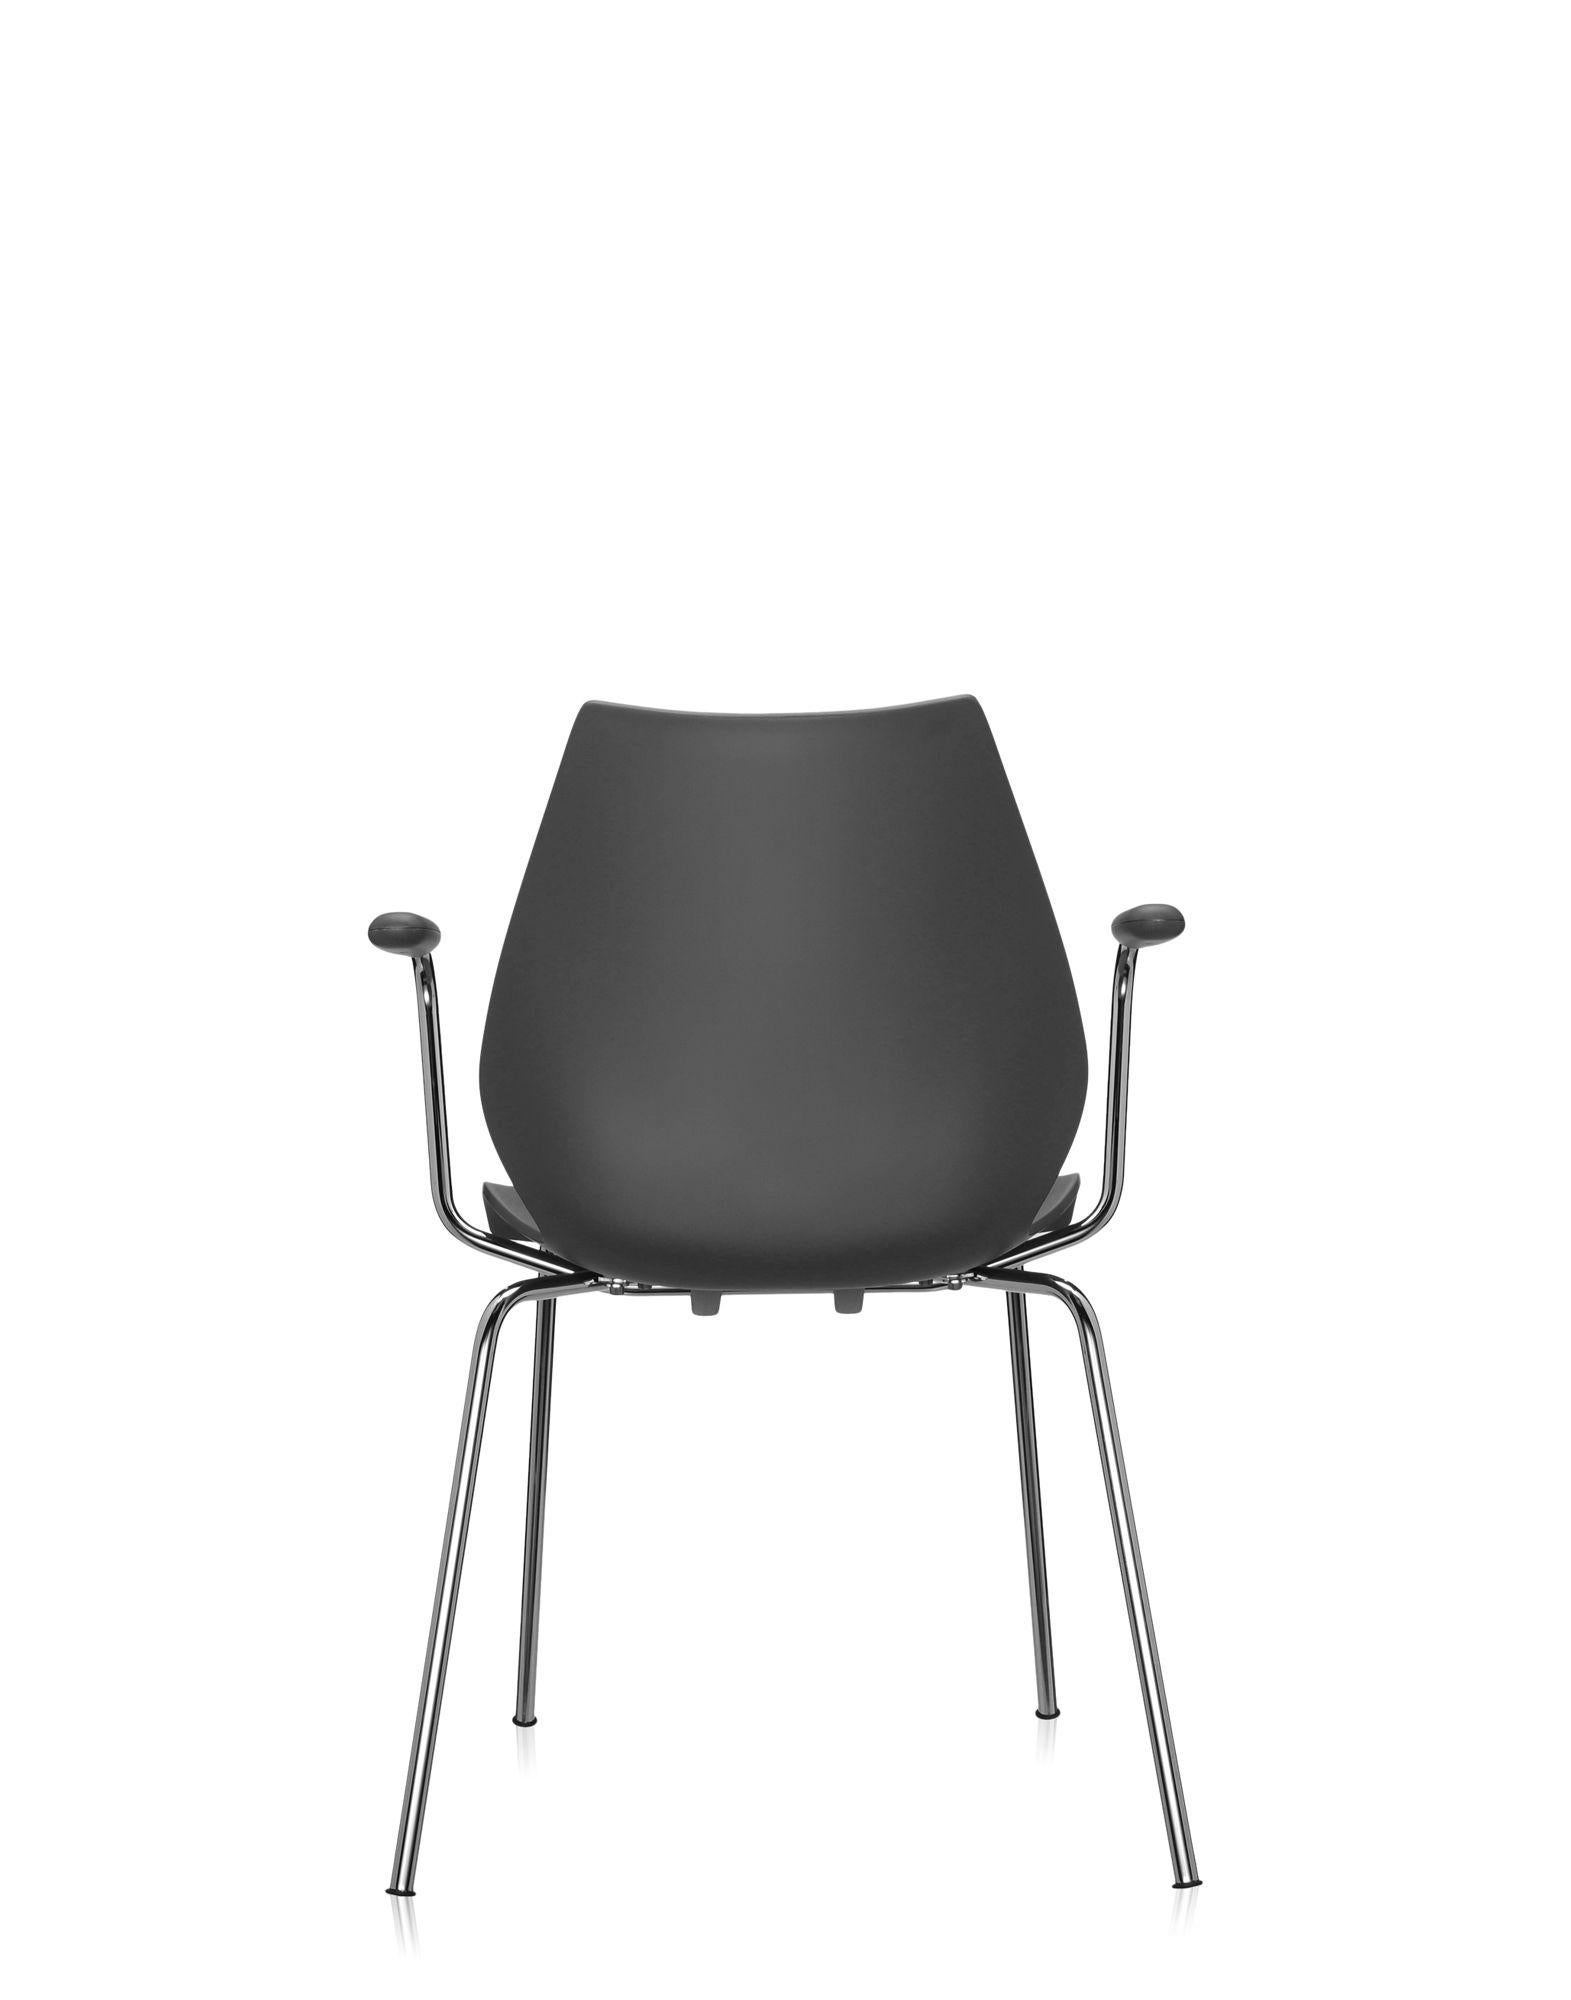 Modern Set of 2 Kartell Maui Armchair in Anthracite by Ludovica and Roberto Palomba